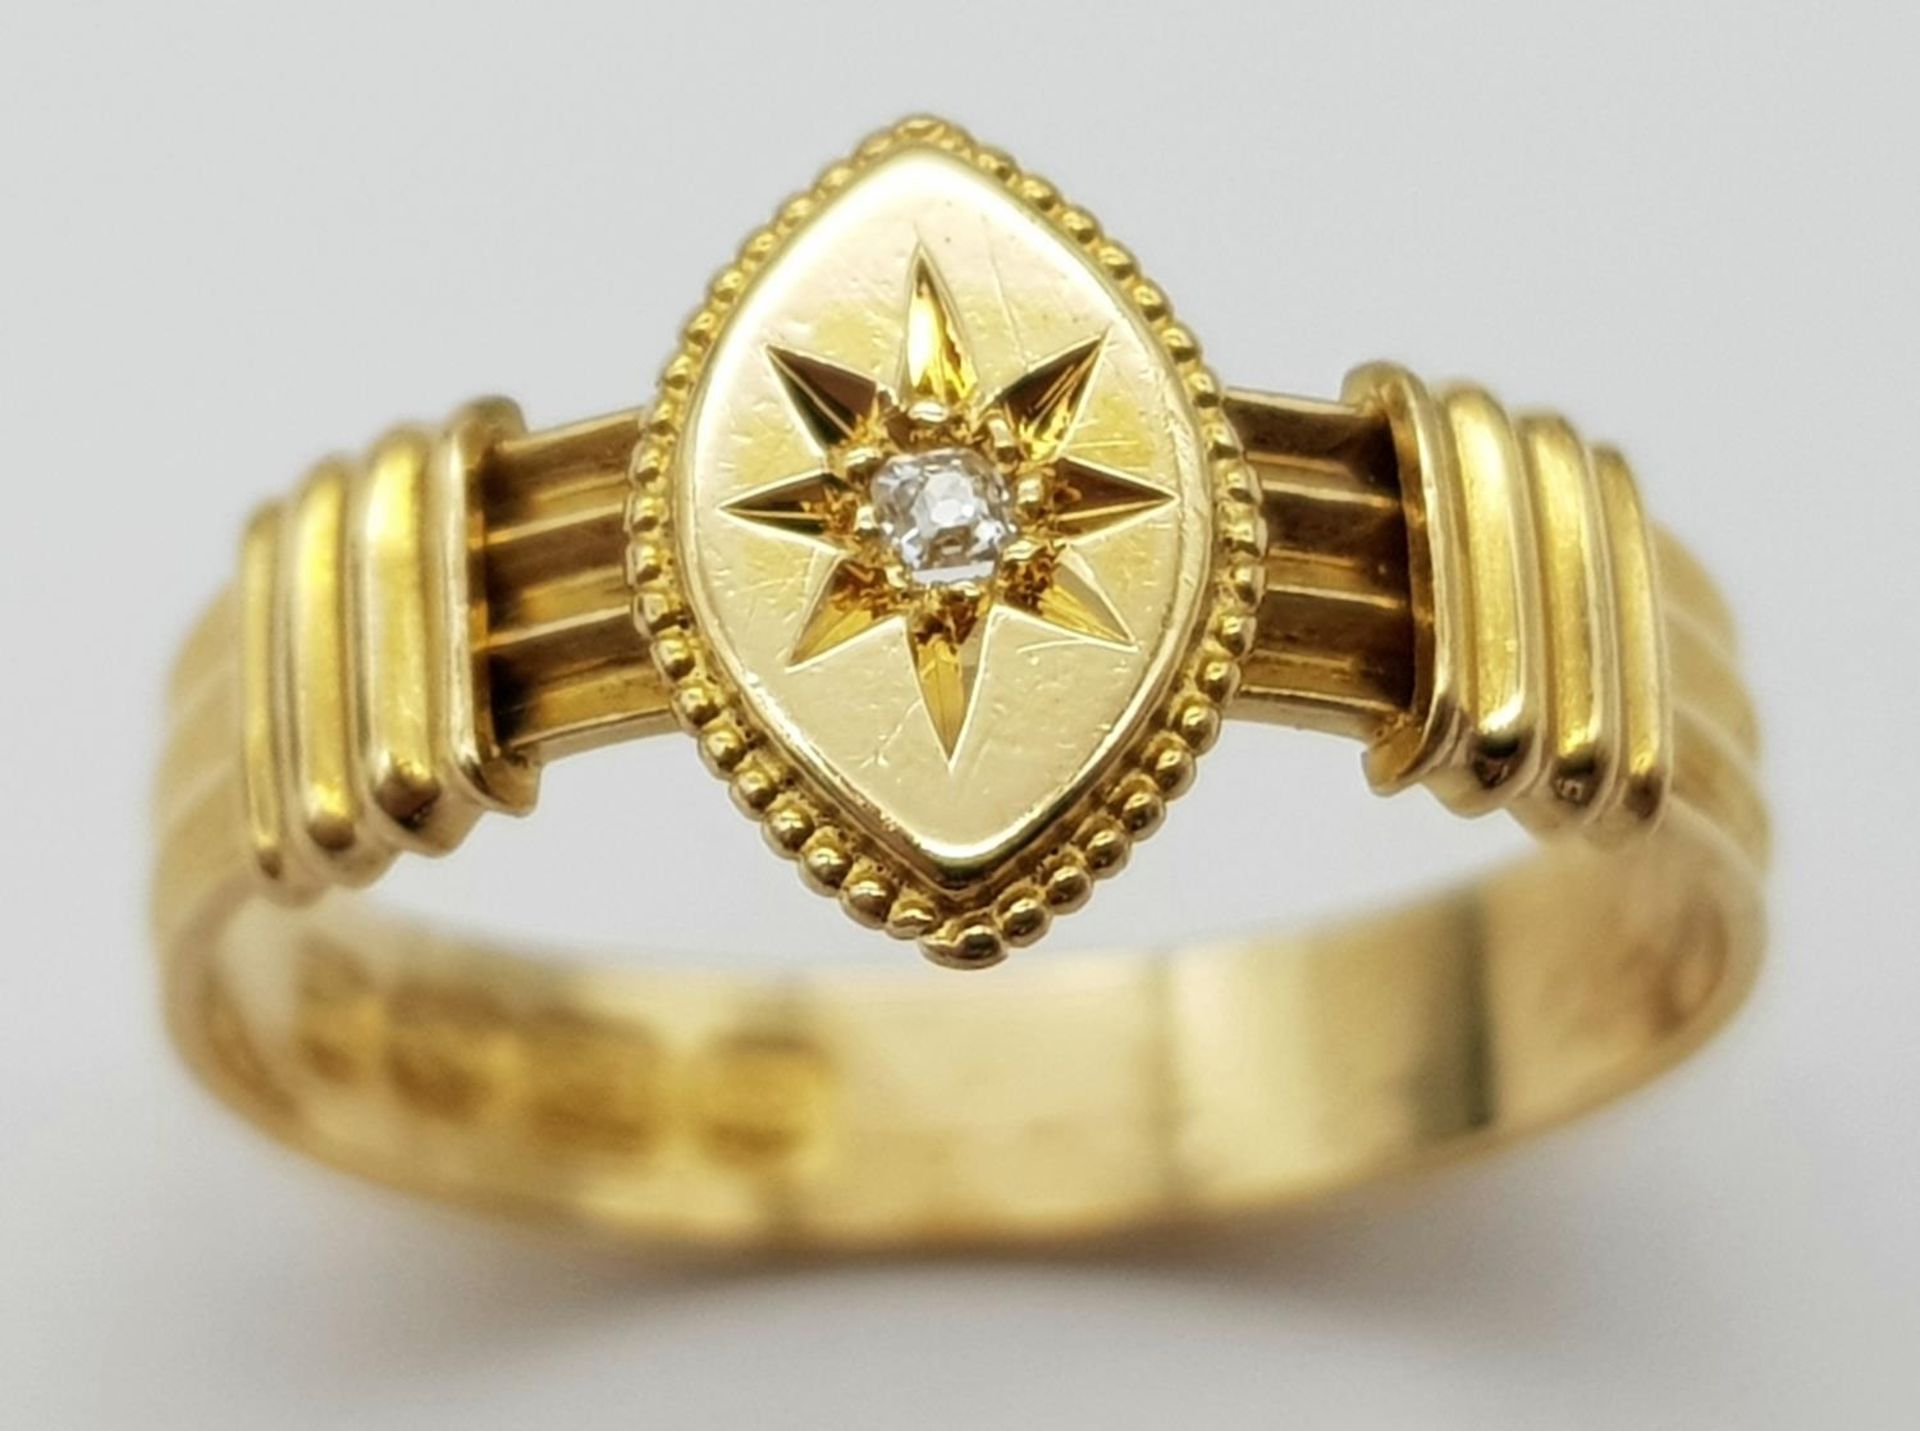 AN ANTIQUE 18K YELLOW GOLD DIAMOND RING. Hallmarked Birmingham, 1894. Size O, 2.5g total weight. - Image 2 of 5